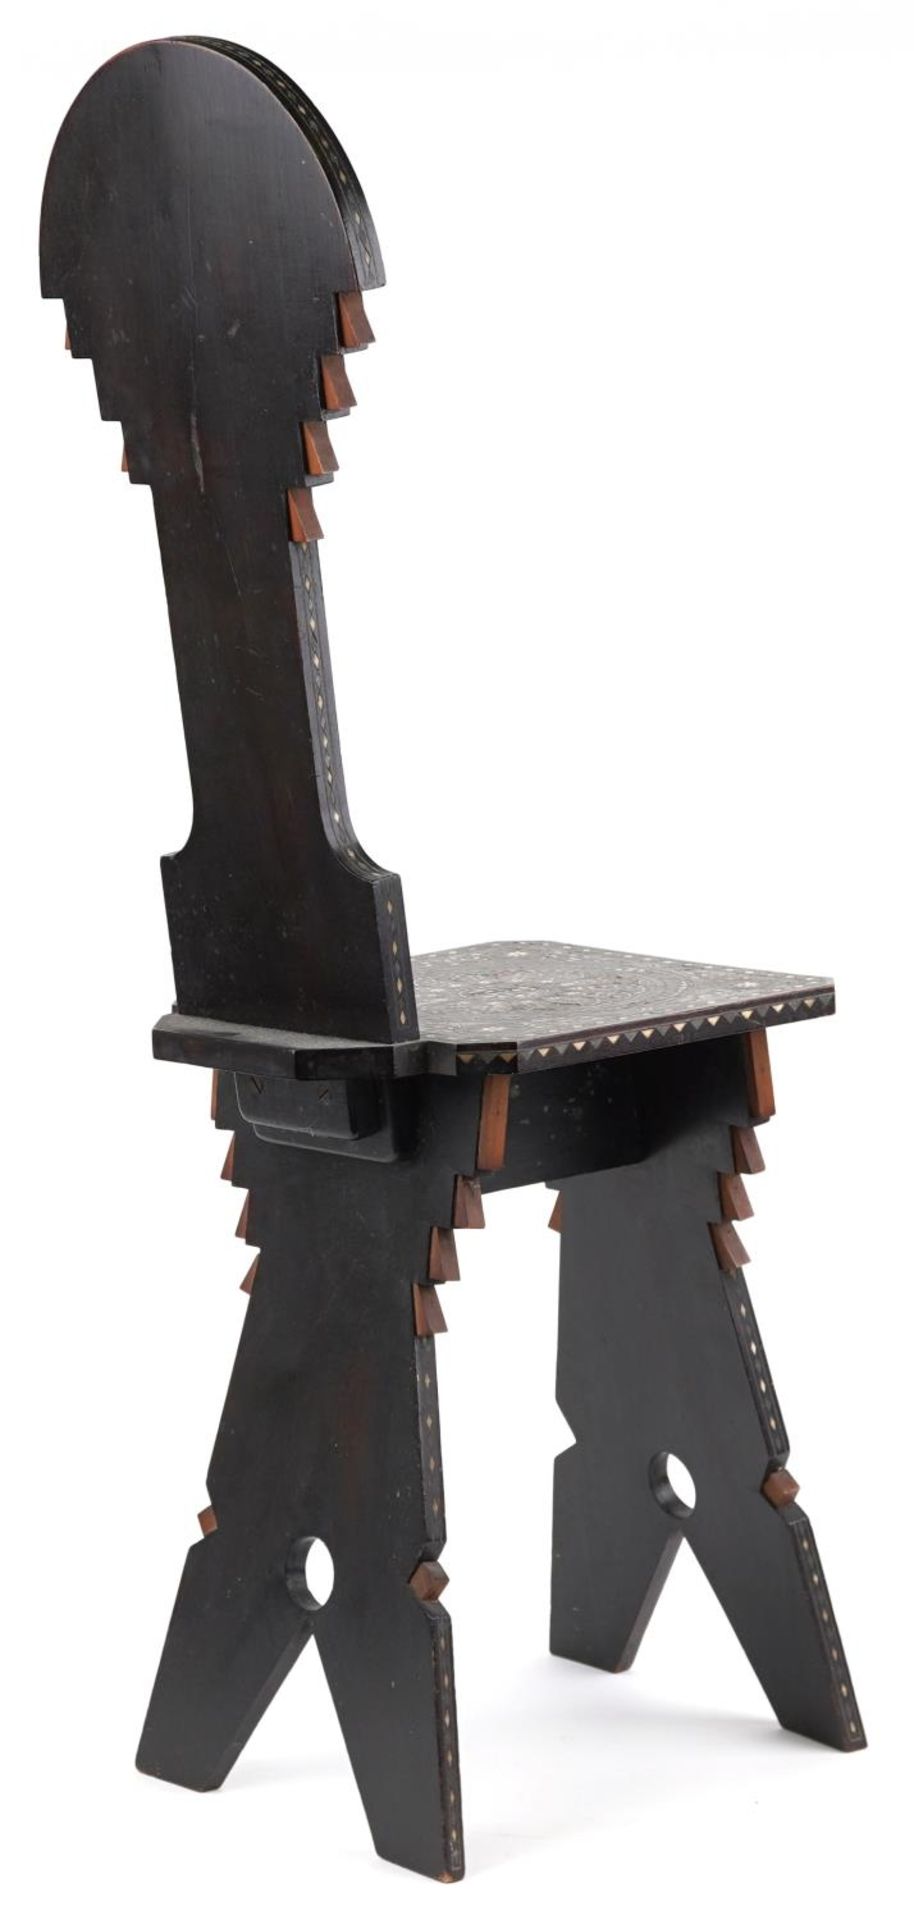 19th century Northern Italy hardwood chair with metal and bone foliate inlay, 101cm high - Image 4 of 4